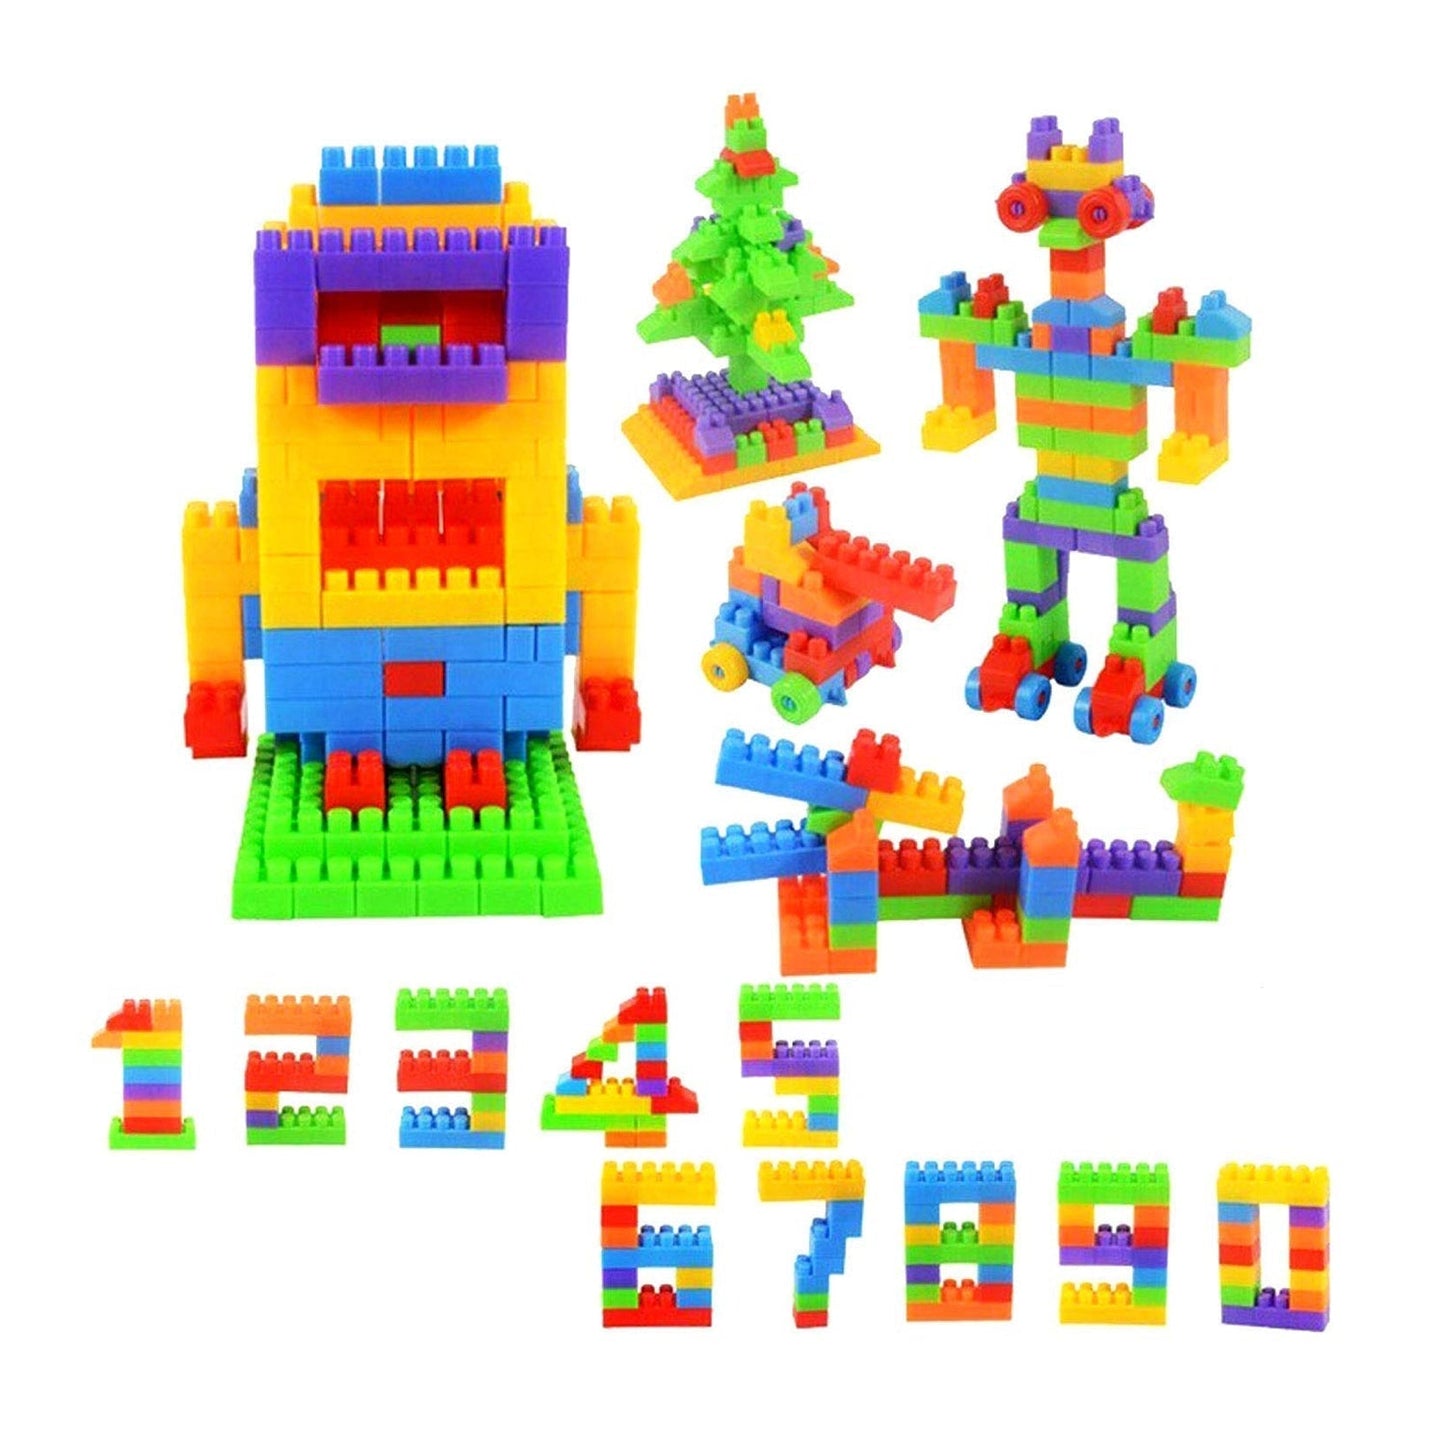 4627 A Building Blocks 60 Pc widely used by kids and children for playing and entertaining purposes among all kinds of household and official places etc. DeoDap